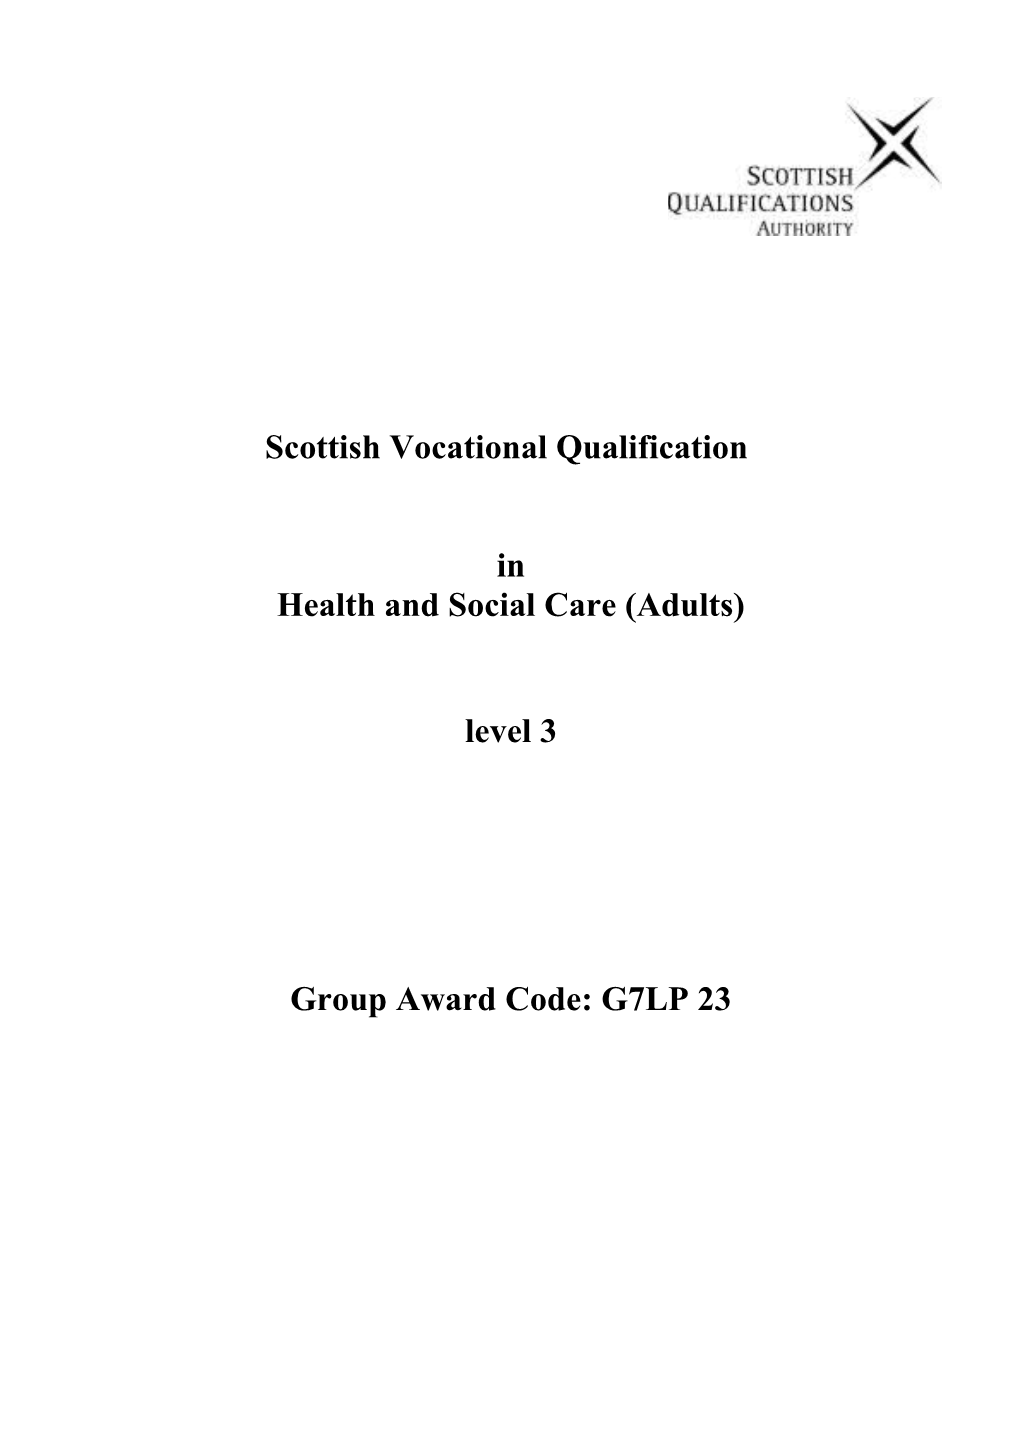 Health and Social Care (Adults)